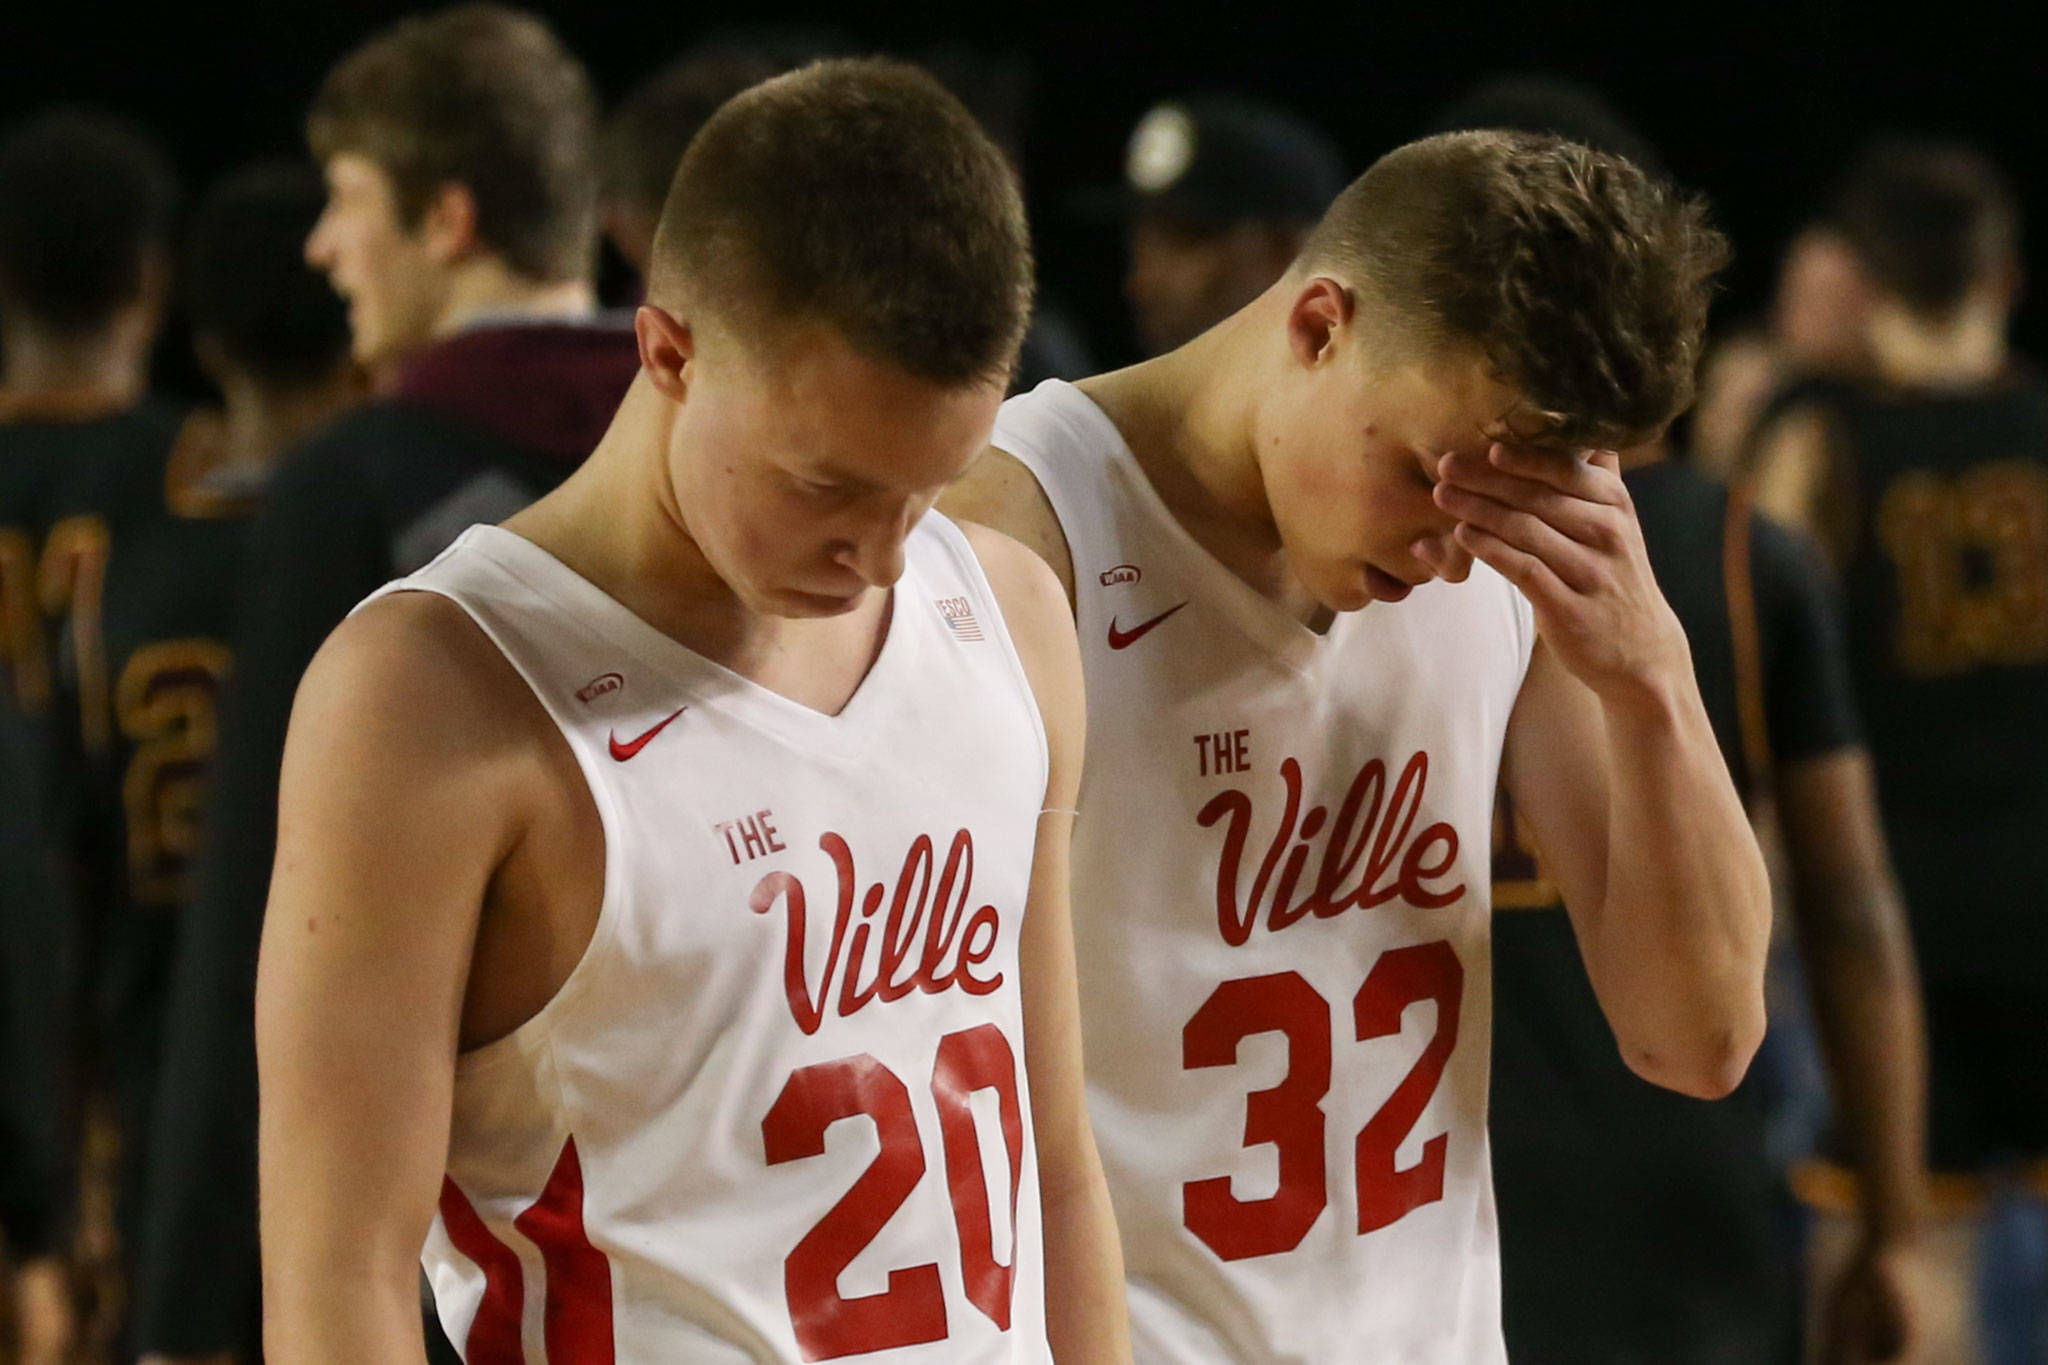 Marysville-Pilchuck’s Luke Dobler and Aaron Kalab leave the court after losing to O’Dea Thursday afternoon at the Tacoma Dome on February 28, 2019. The Tomahawks lost 63-53. (Kevin Clark / The Herald)